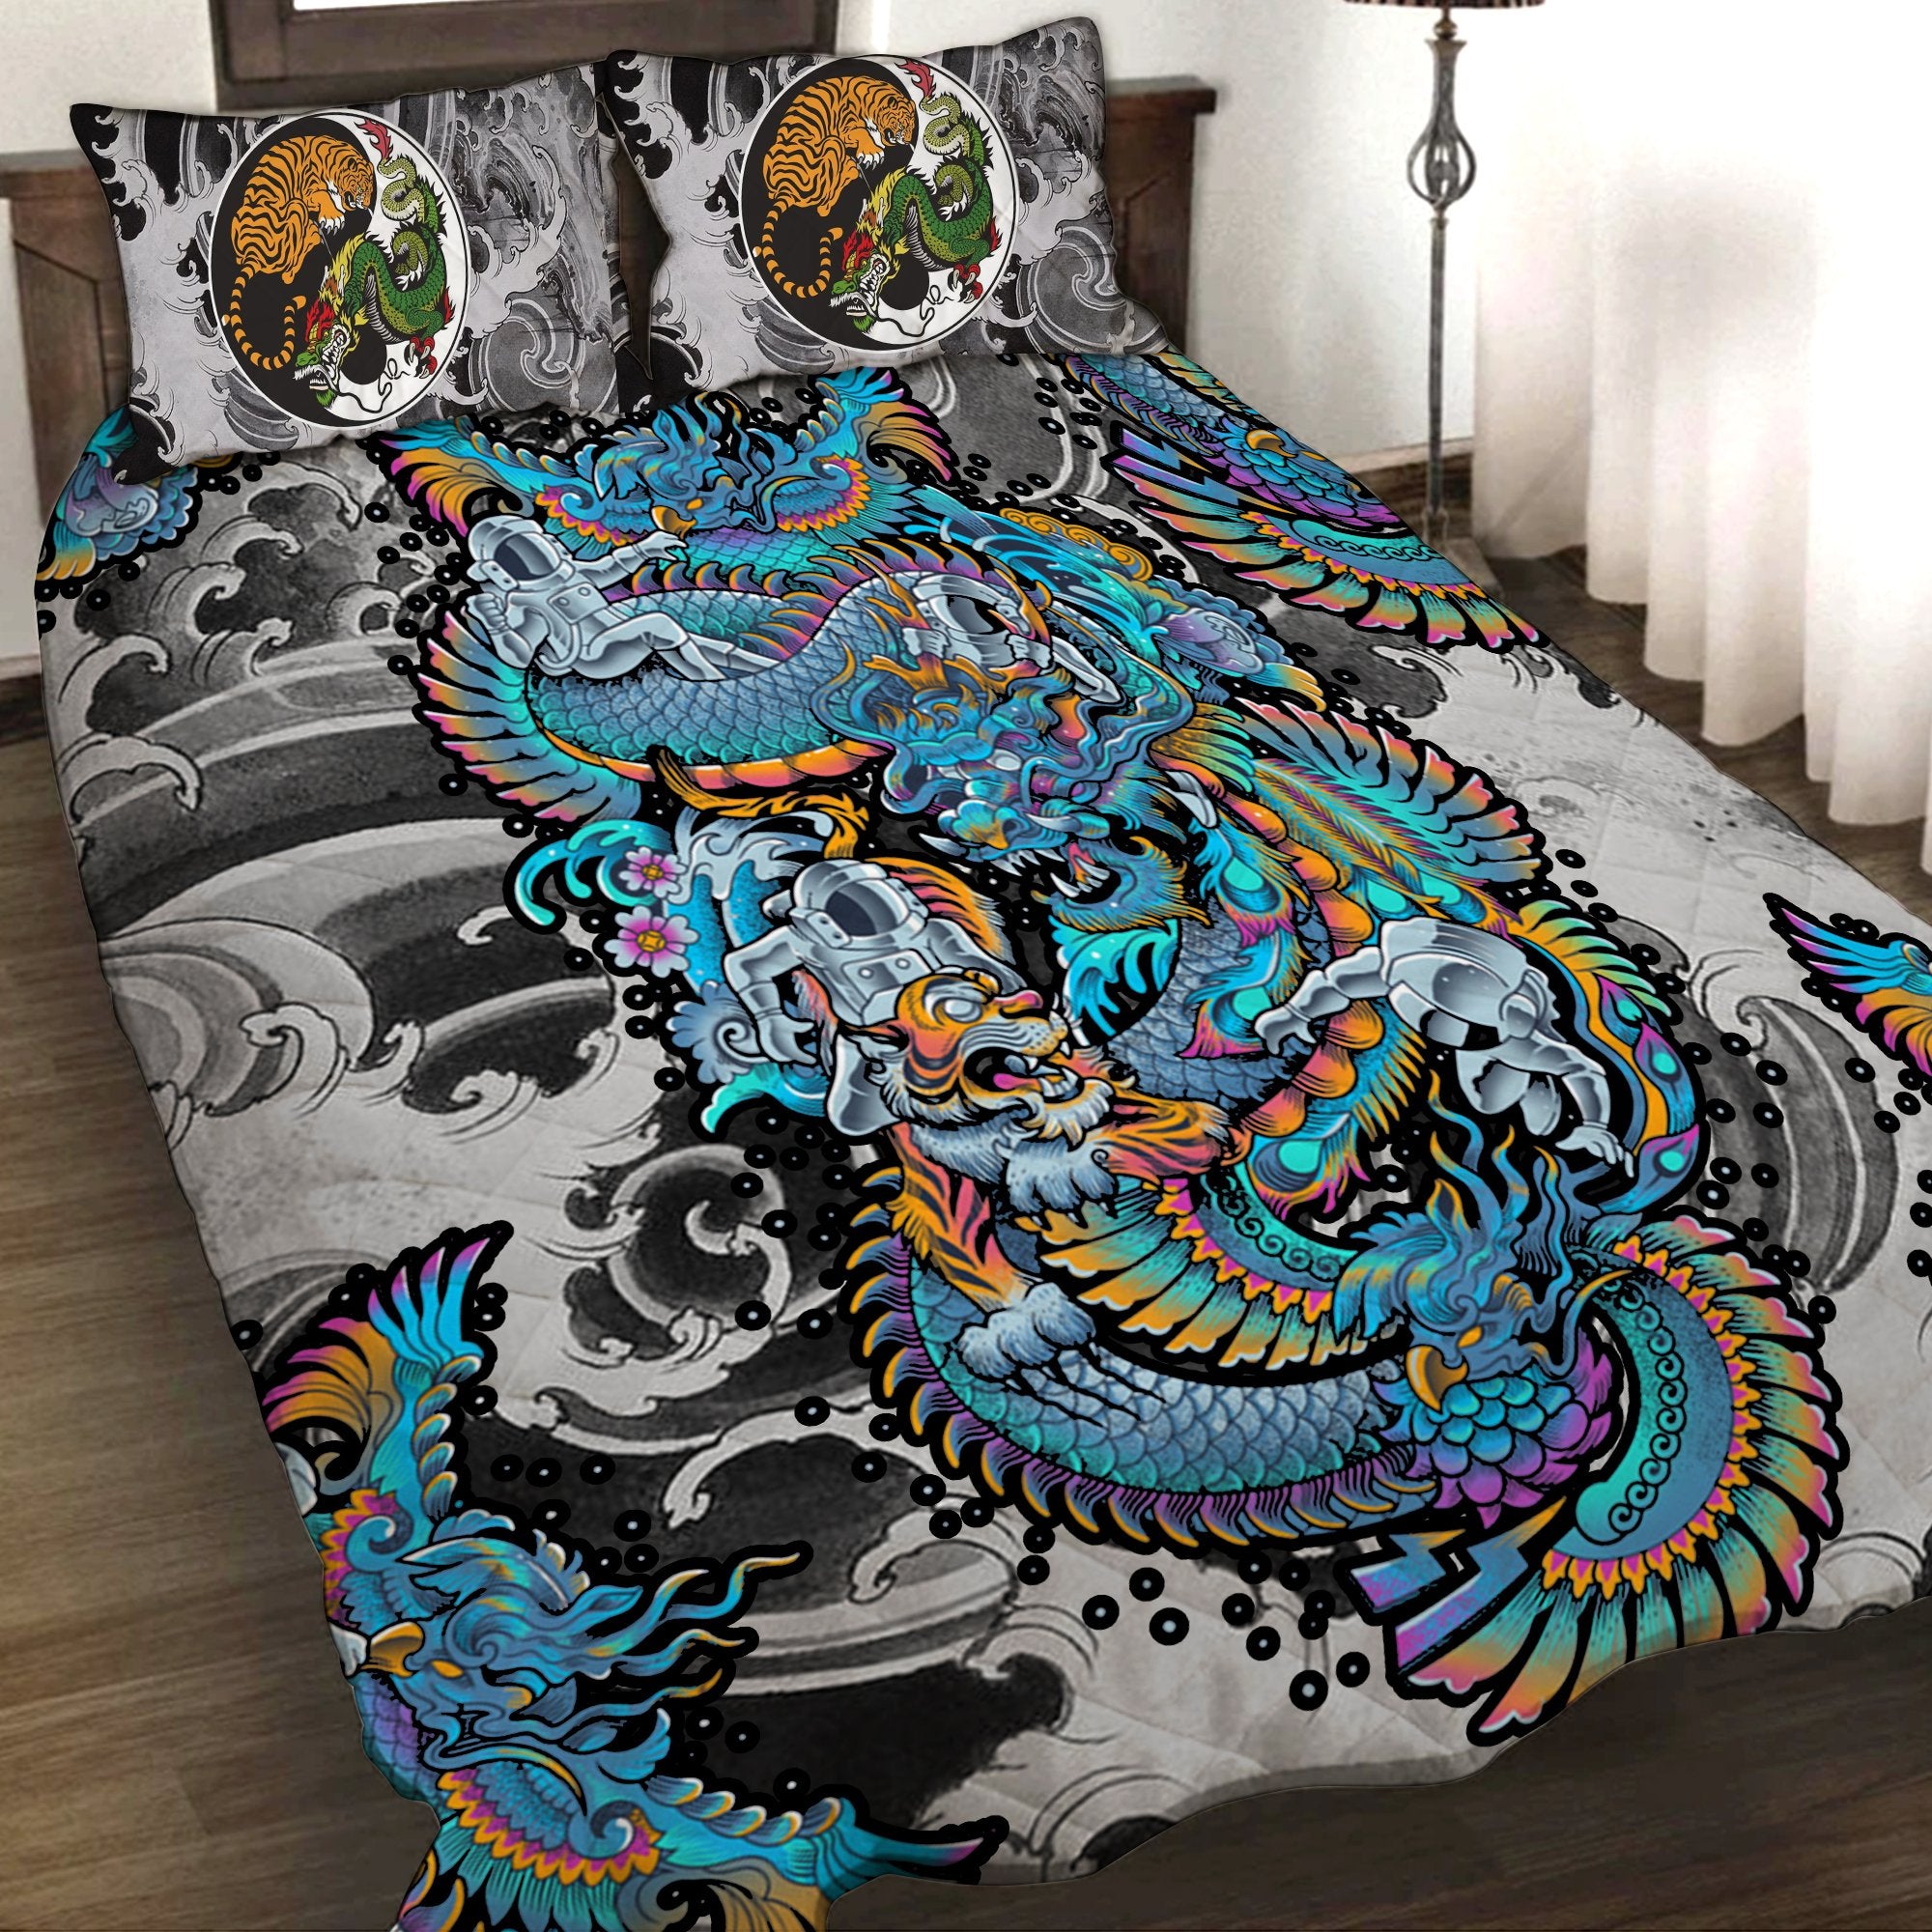 Bed quilt - The Space, Dragon And Tiger 3D Quilt Set